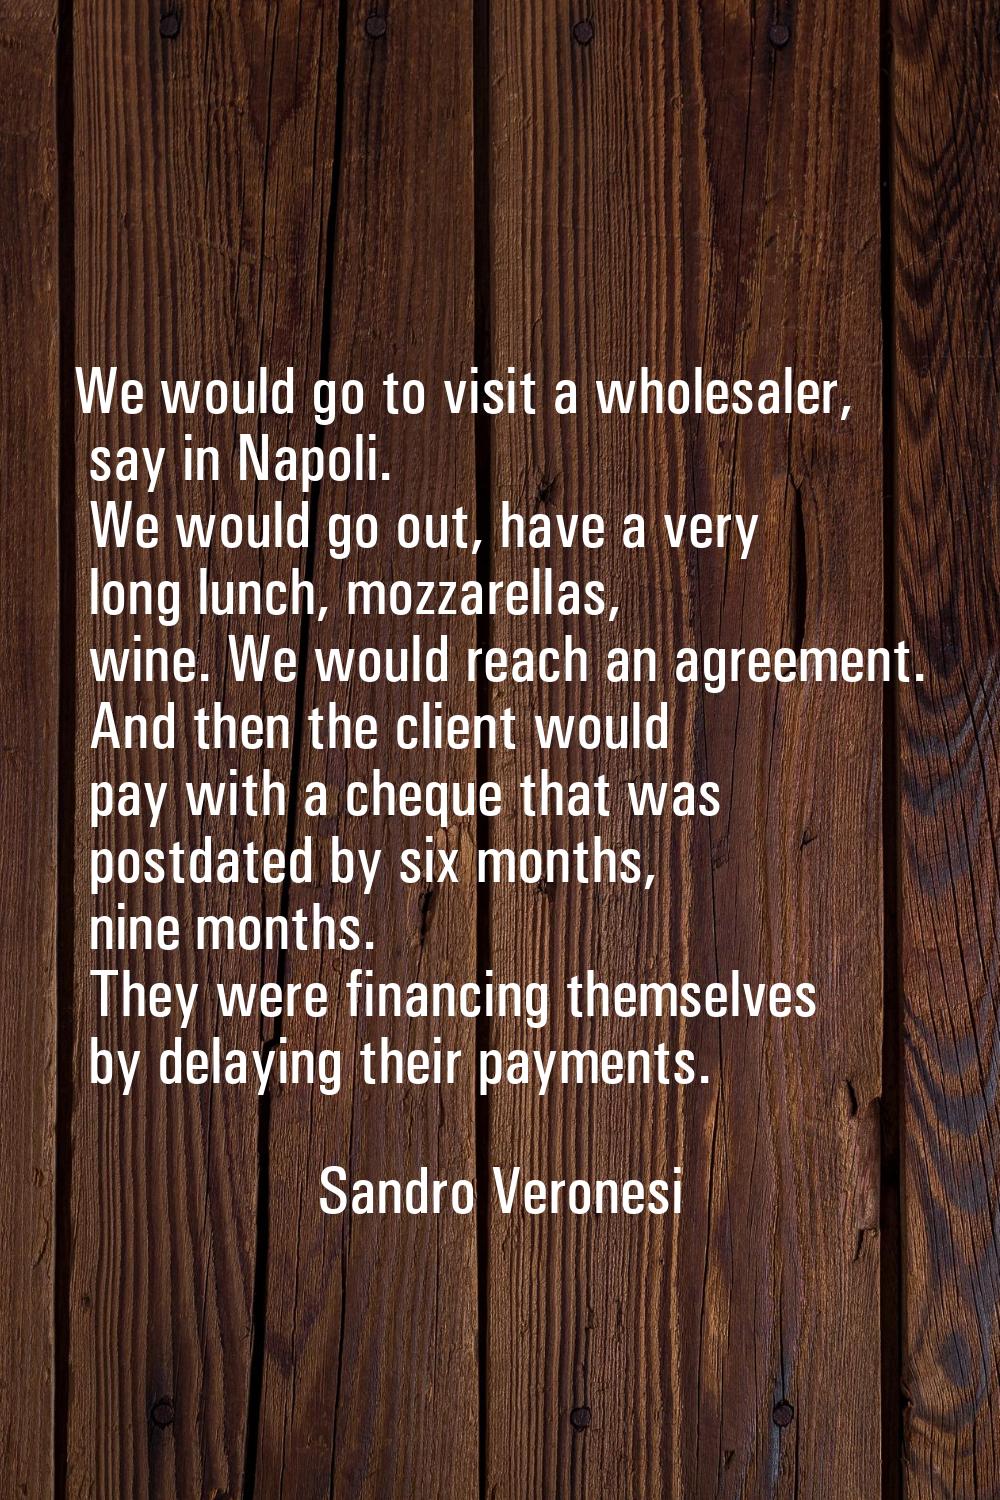 We would go to visit a wholesaler, say in Napoli. We would go out, have a very long lunch, mozzarel